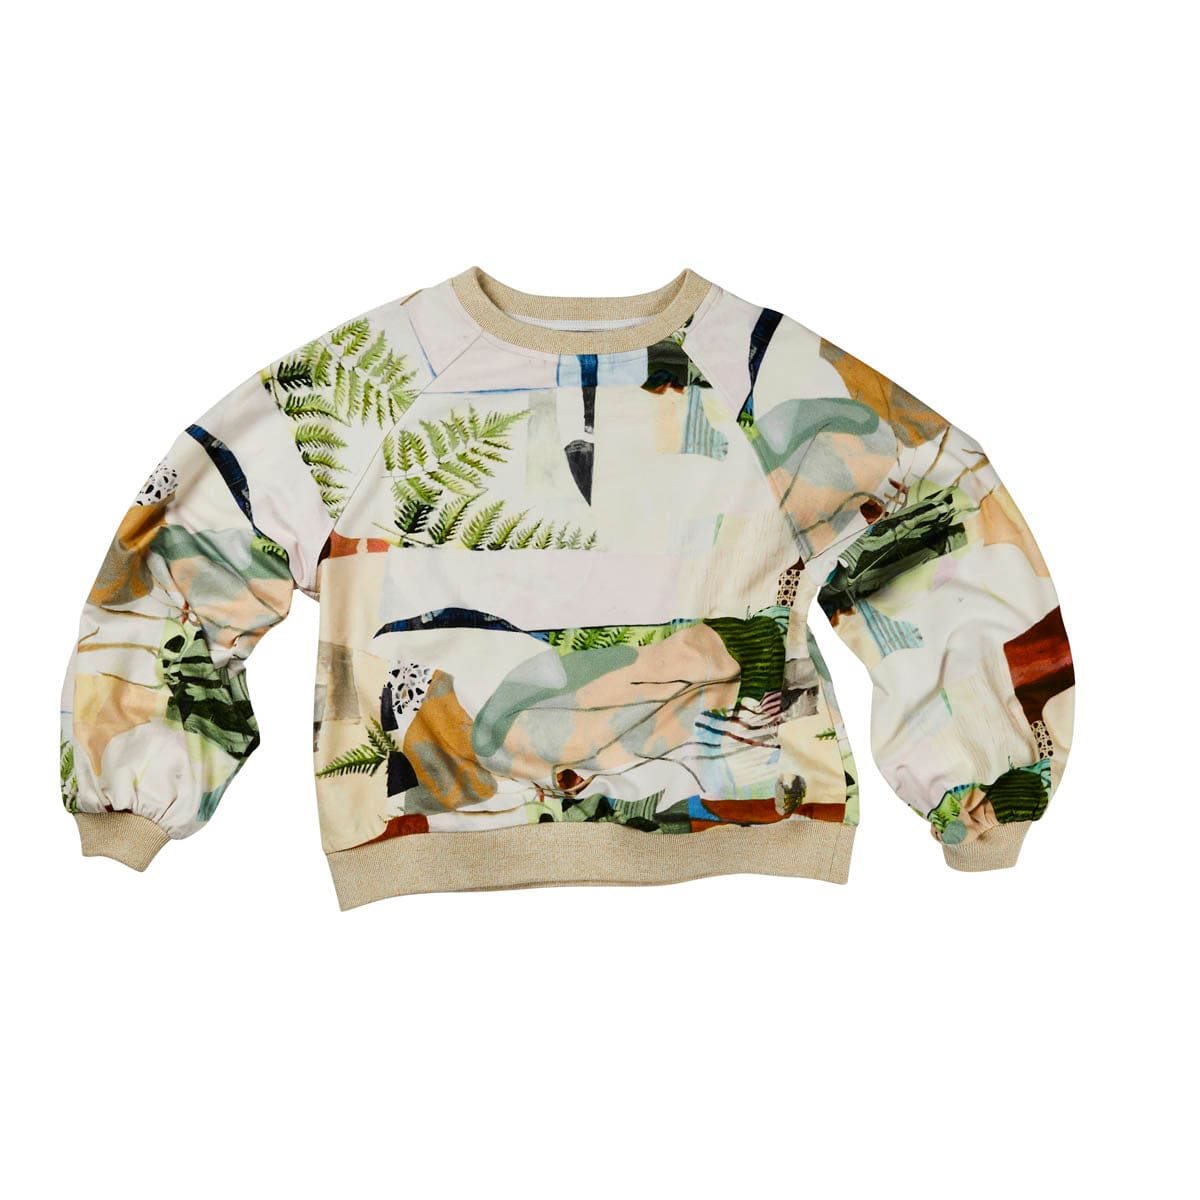 Art Sweater - Love it when a plan comes together